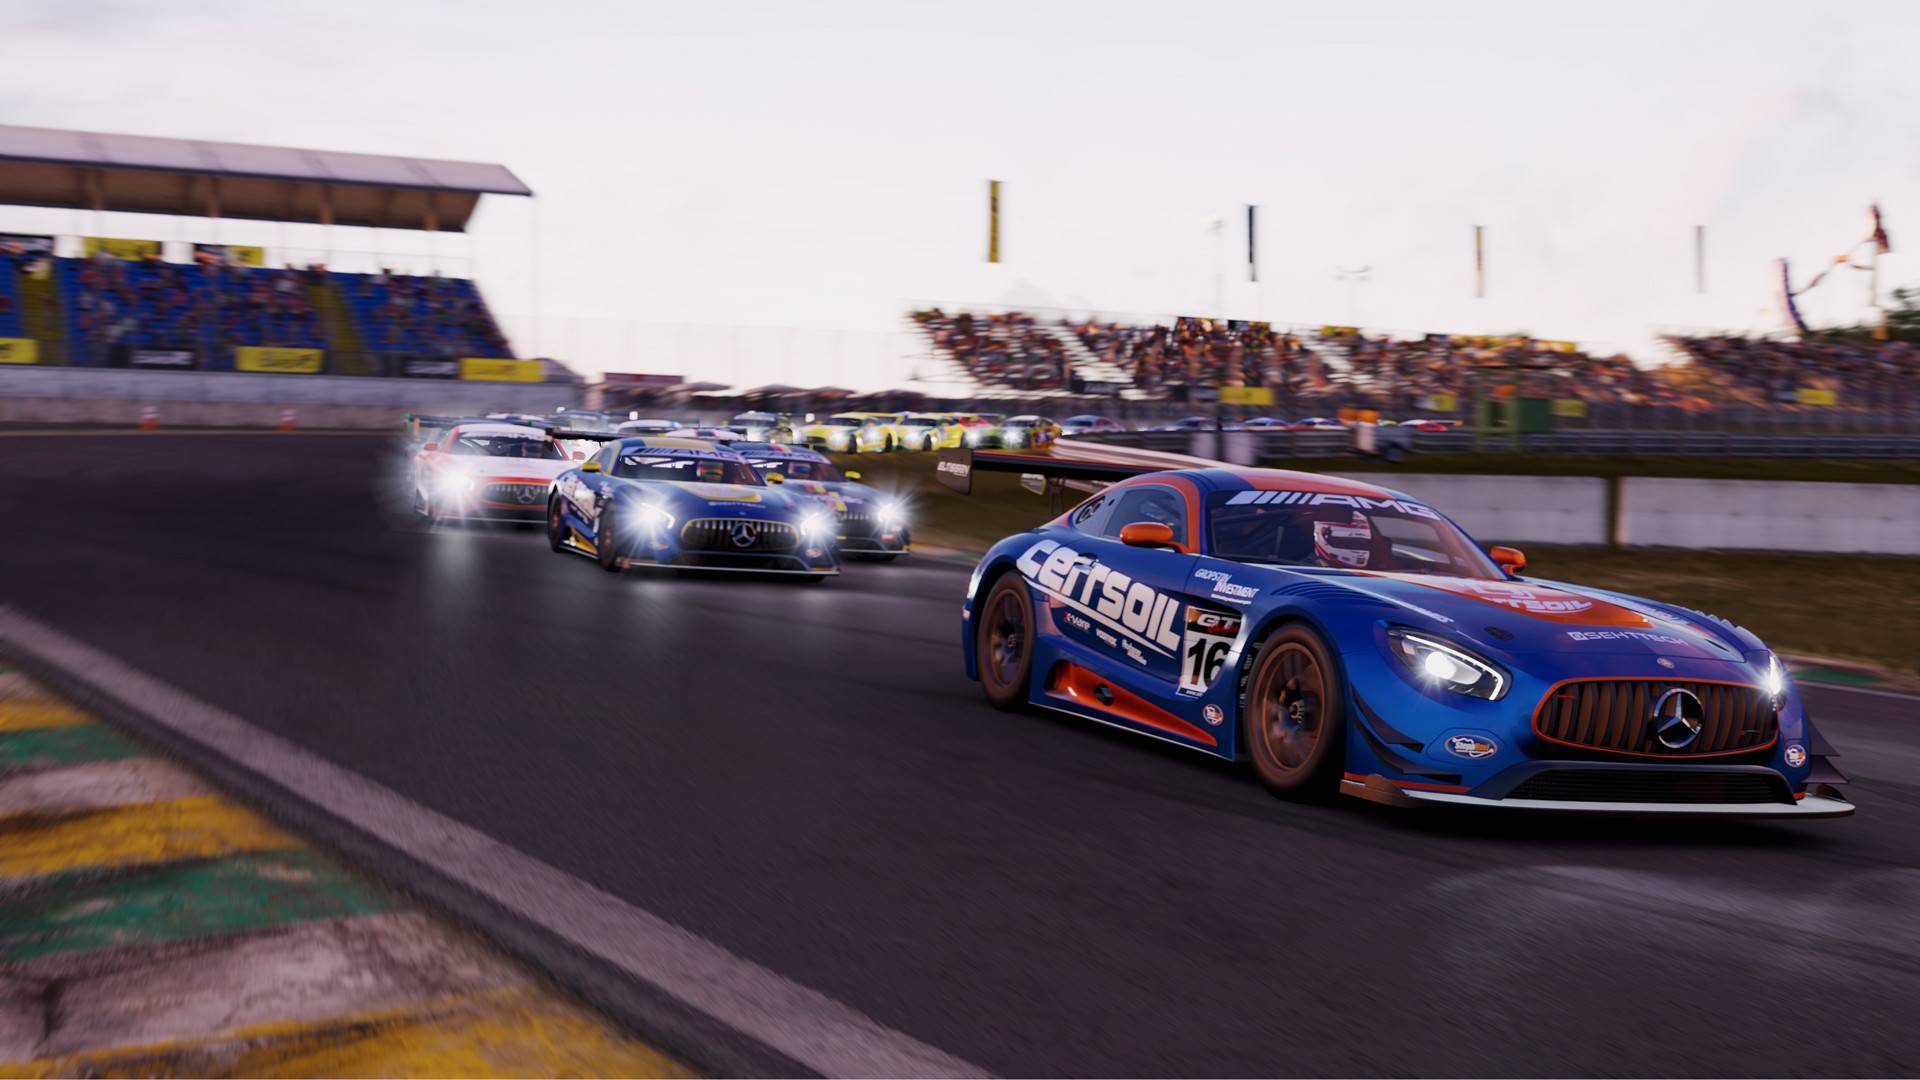 Gaming Deals: $50 Project Cars, $350 Xbox One + Three Games + $50